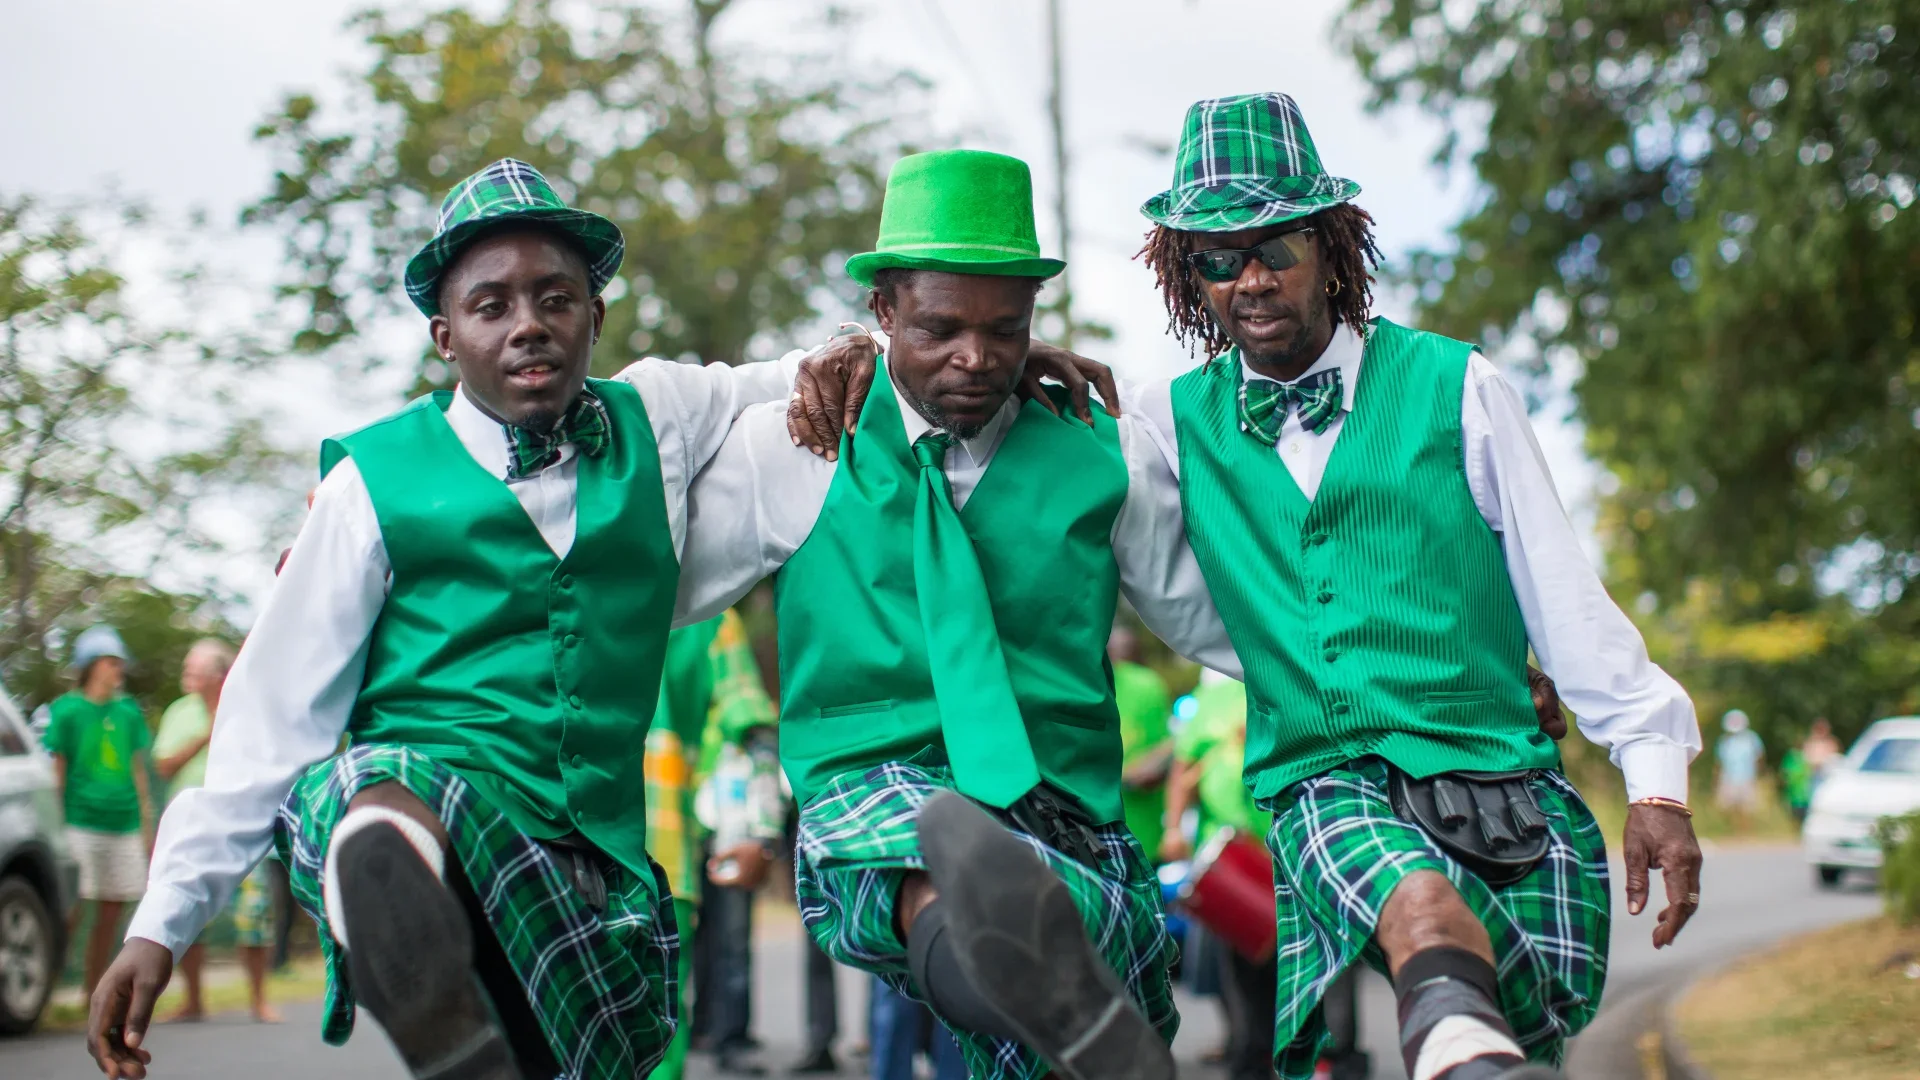 Yes, A Caribbean Island Celebrates St. Patrick's Day. Here's Why